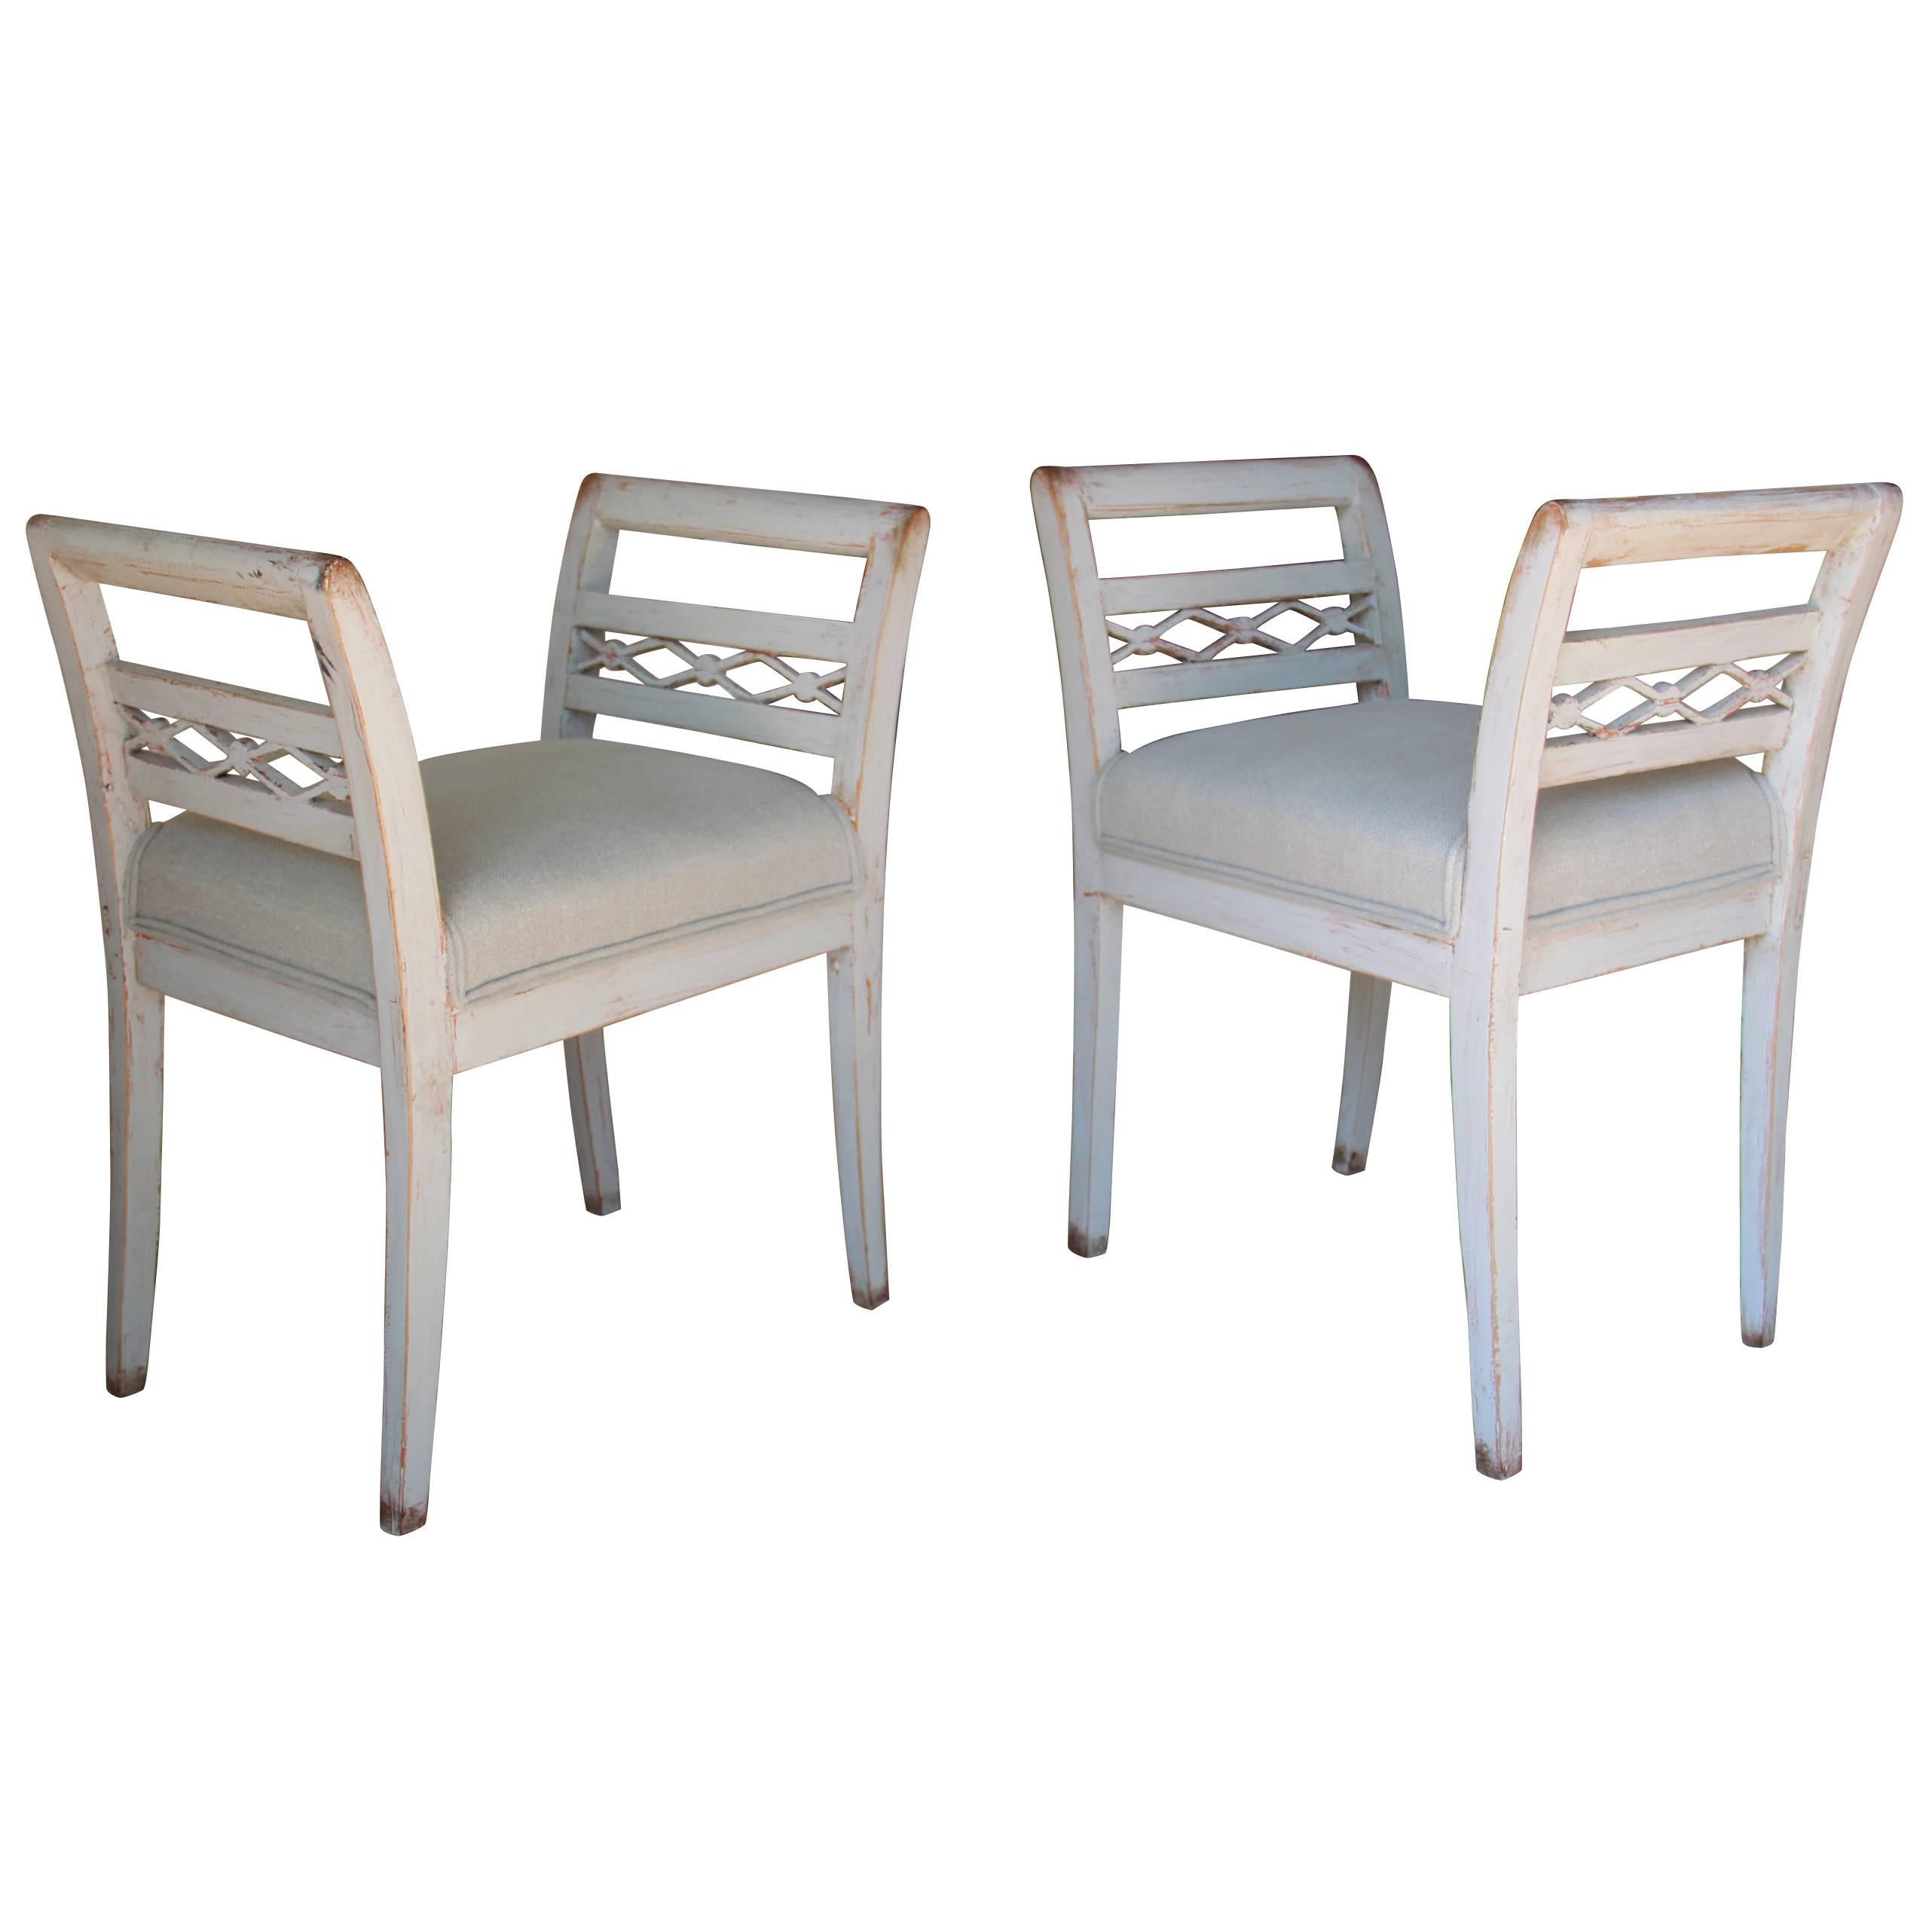 Swedish Pair of Stools in the Gustavian Style, 19th Century Antique